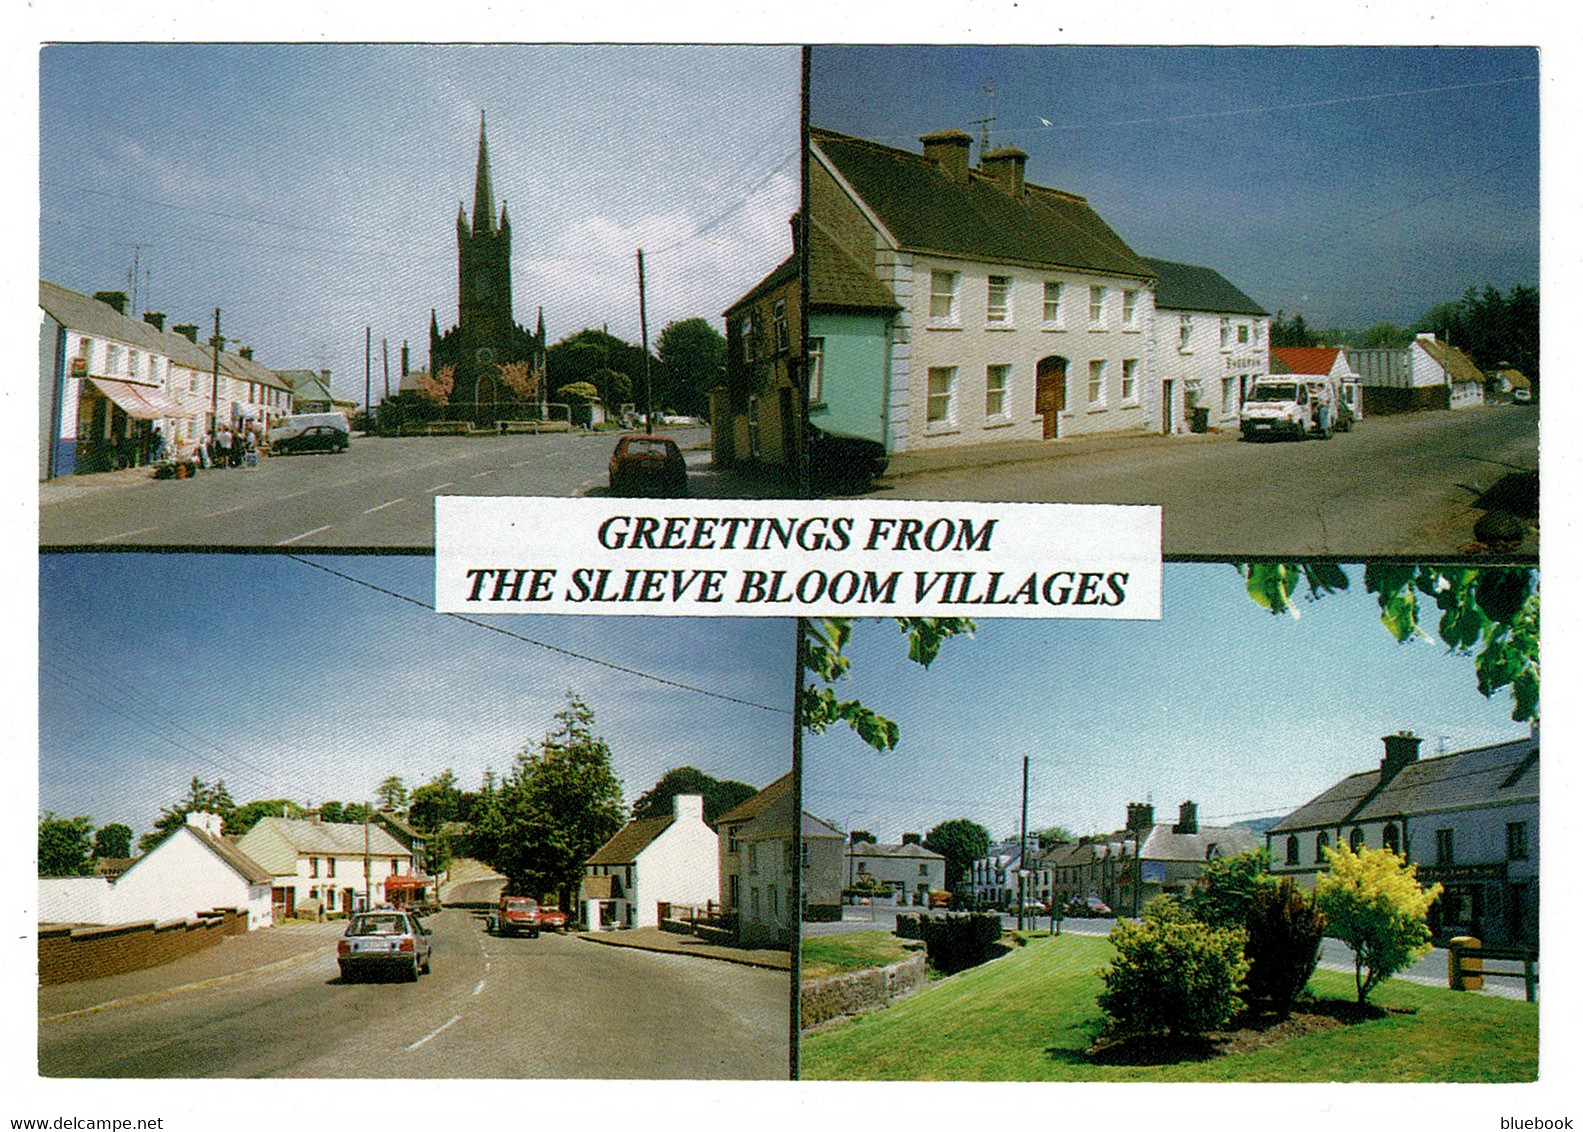 Ref 1490 - Postcard - Slieve Bloom Villages Of County Laois & County Offaly - Ireland - Clonaslee Coolrain Kinnity - Laois